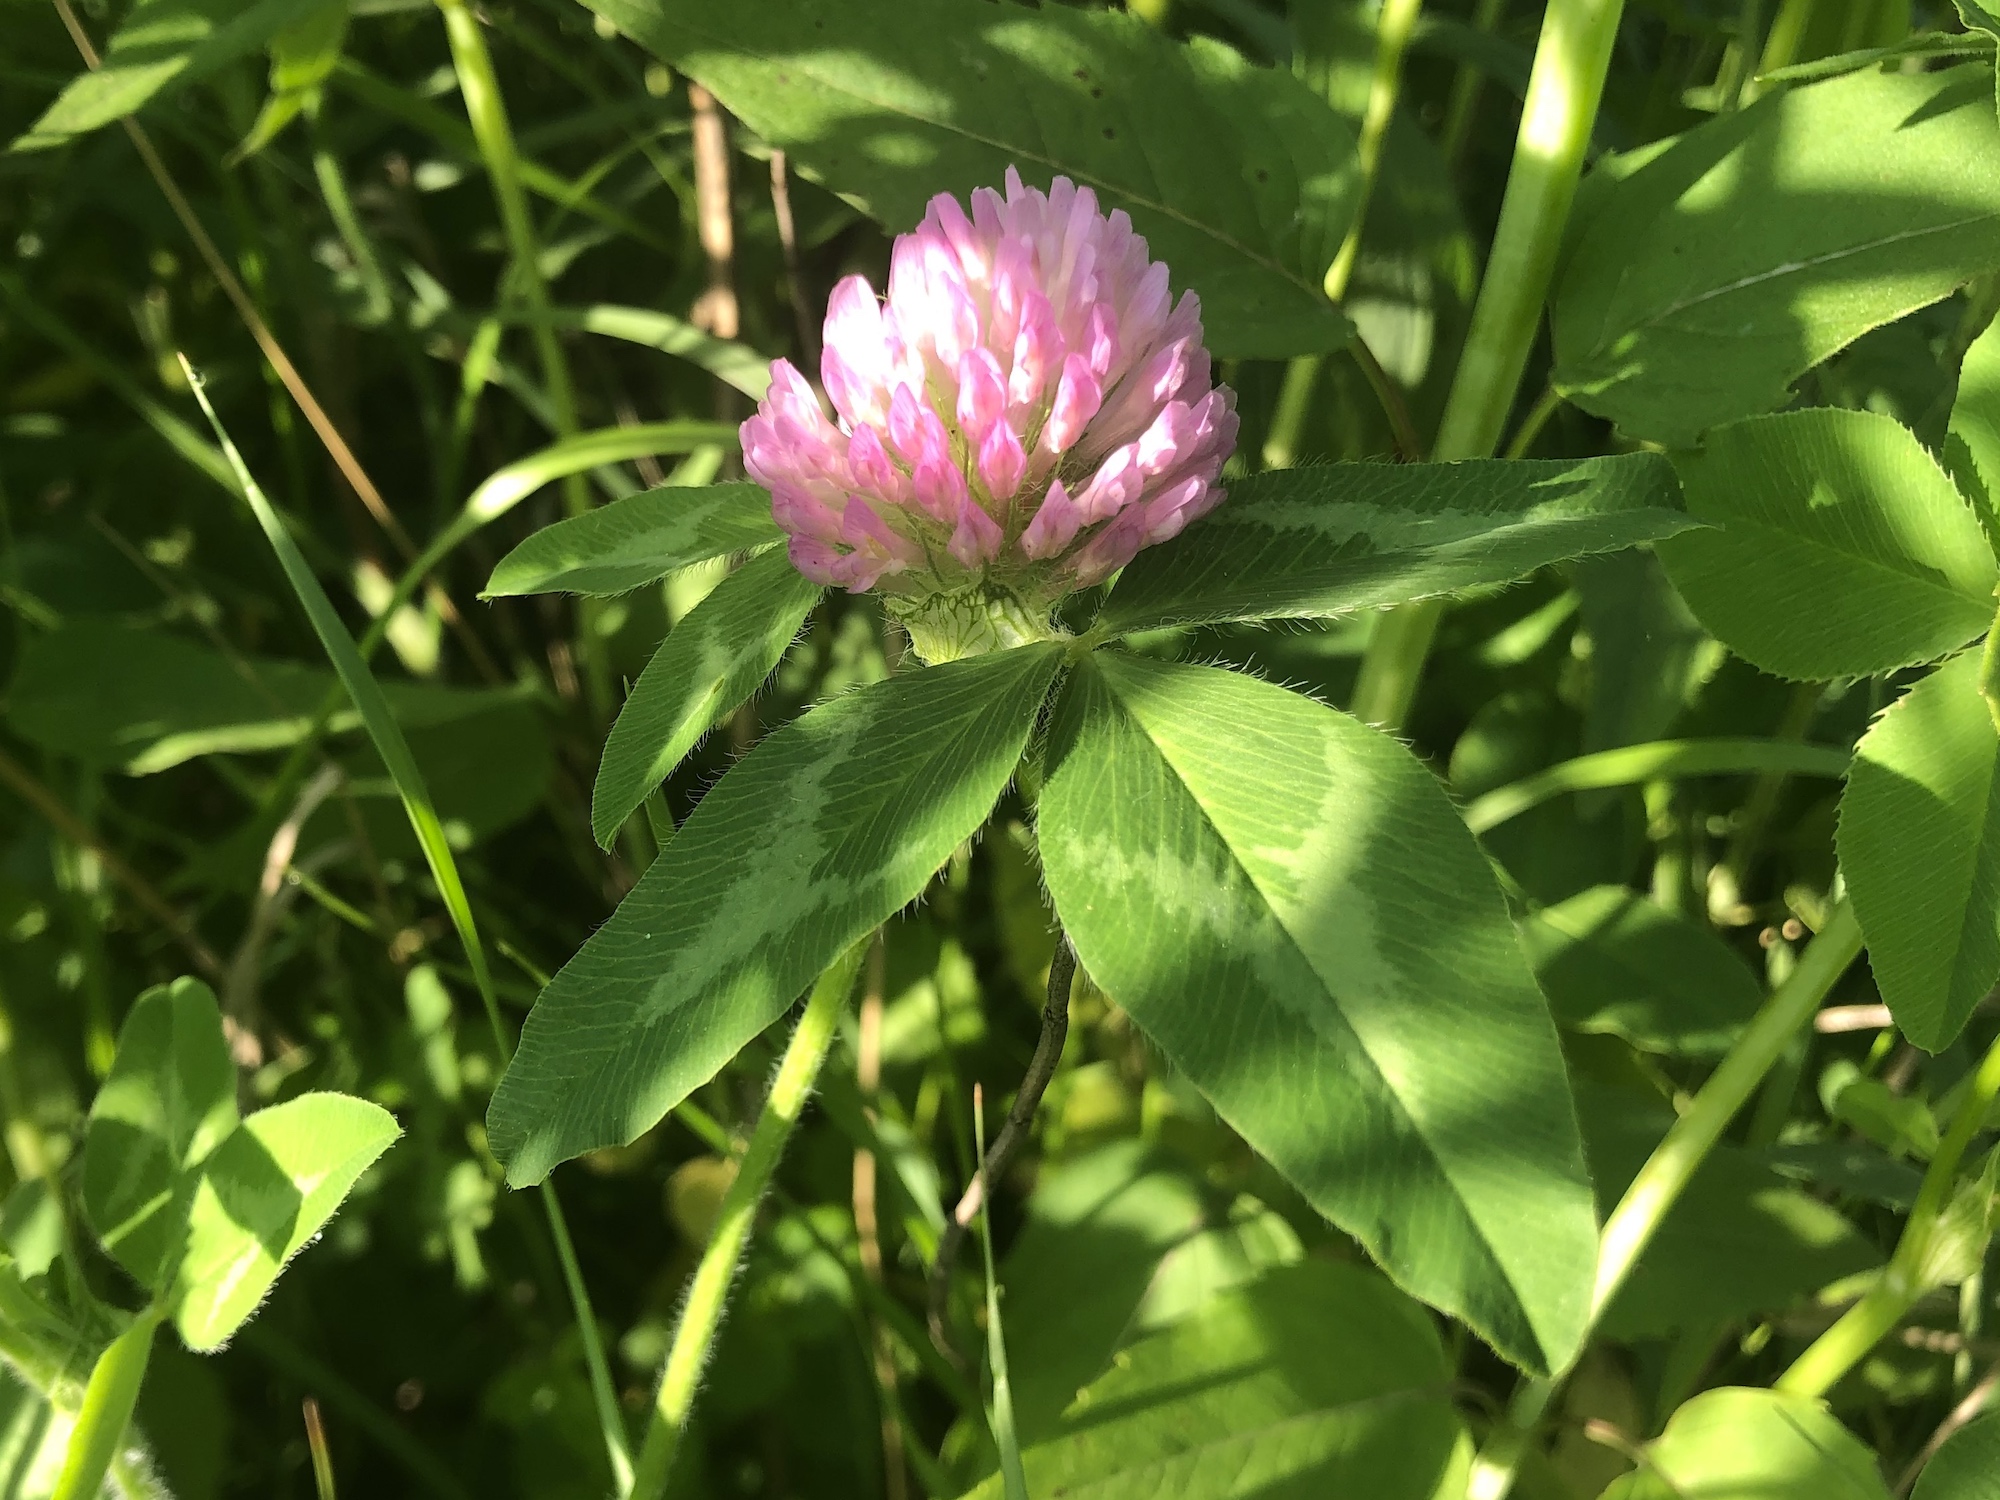 Red Clover on the bank of the retaining pond on June 4, 2020.